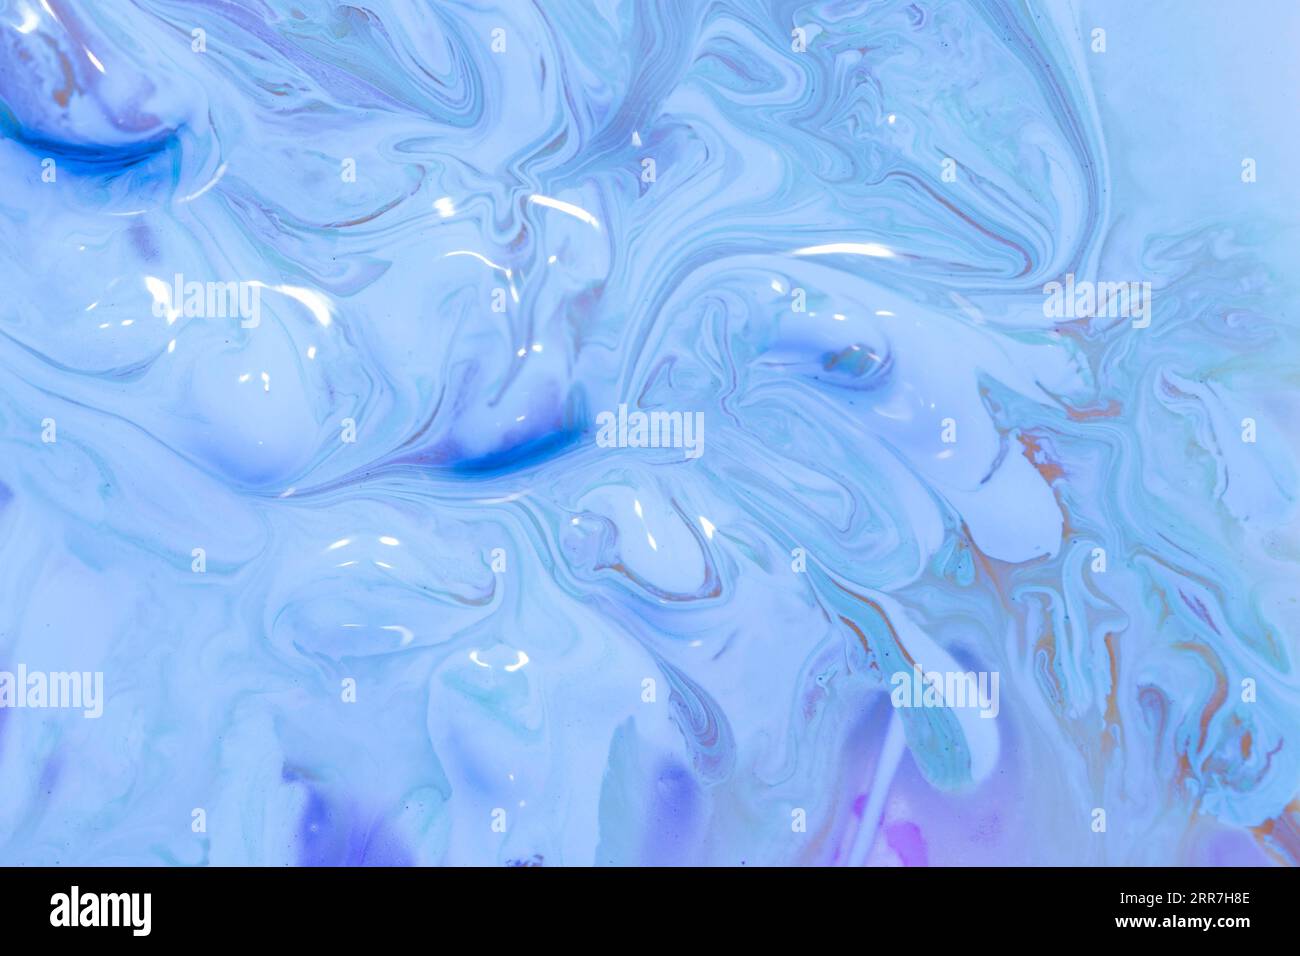 Thick layers abstract blue waves Stock Photo